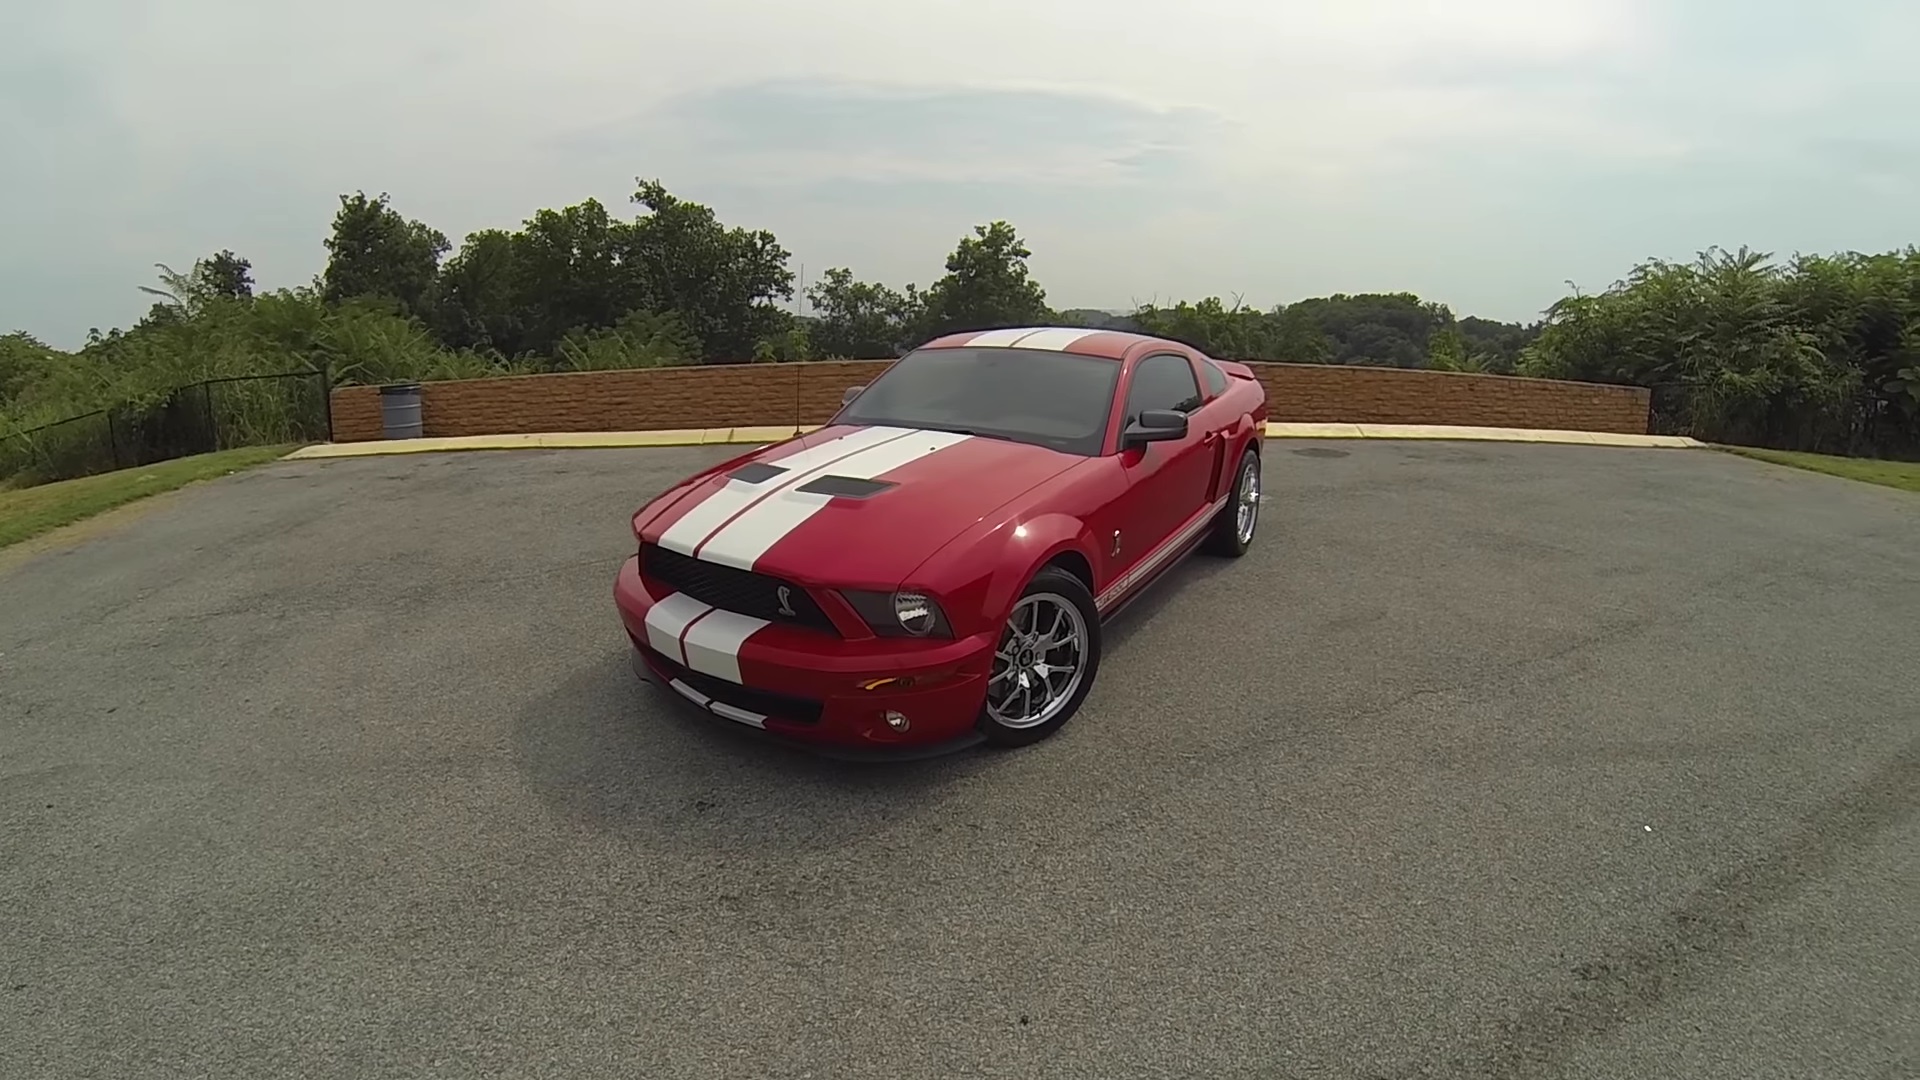 Video: 2007 Ford Mustang Shelby GT-500 POV Test Drive